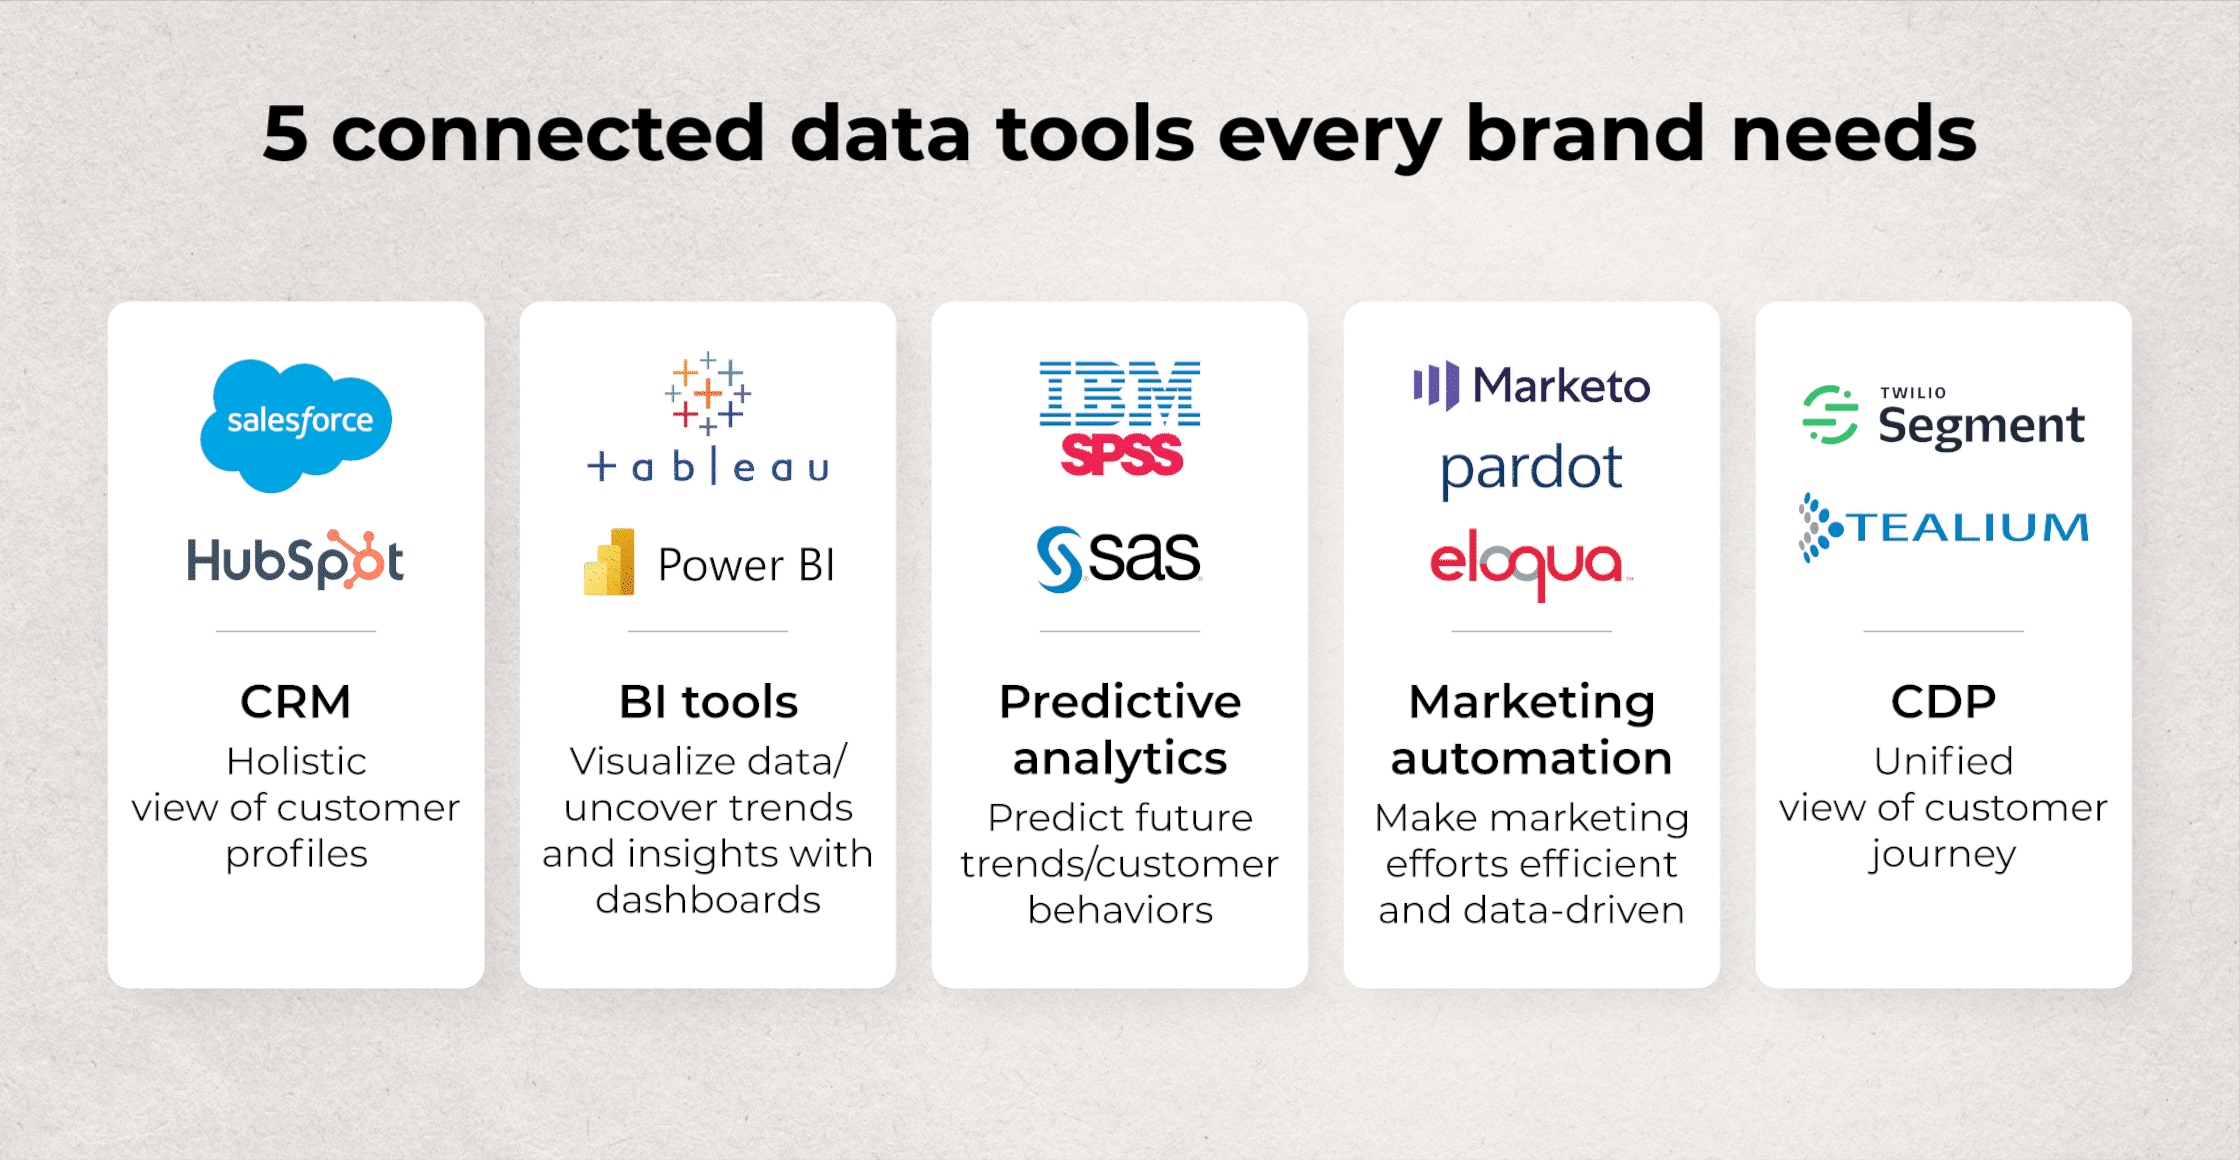 5 connected data tools every brand needs